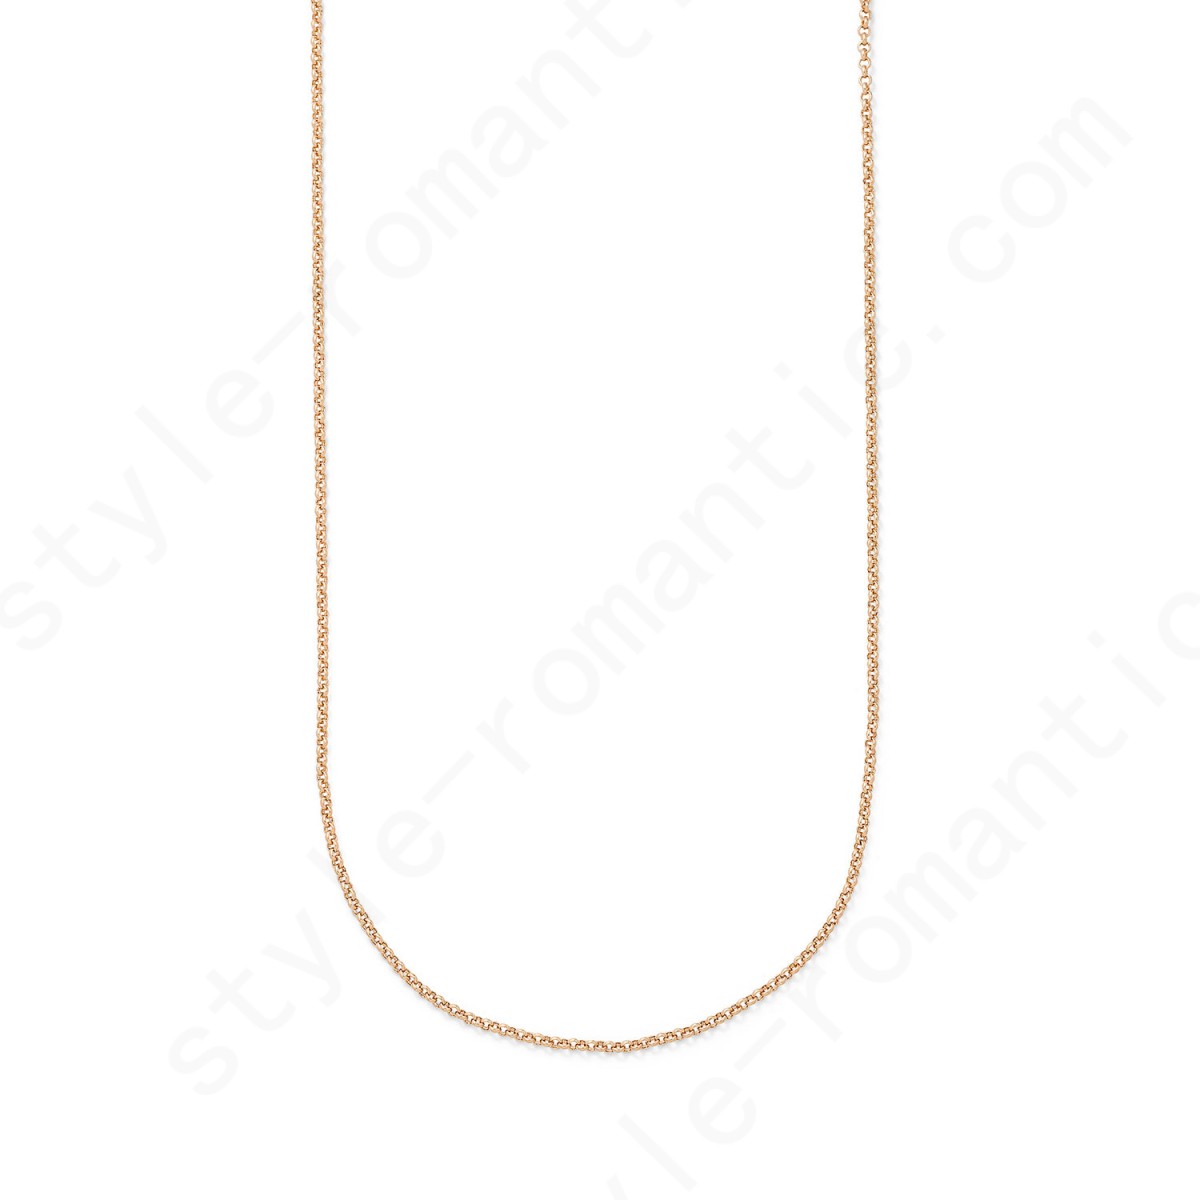 Thirty-One Gifts Dainty Rolo Chain - Inch - Gold Tone - -0